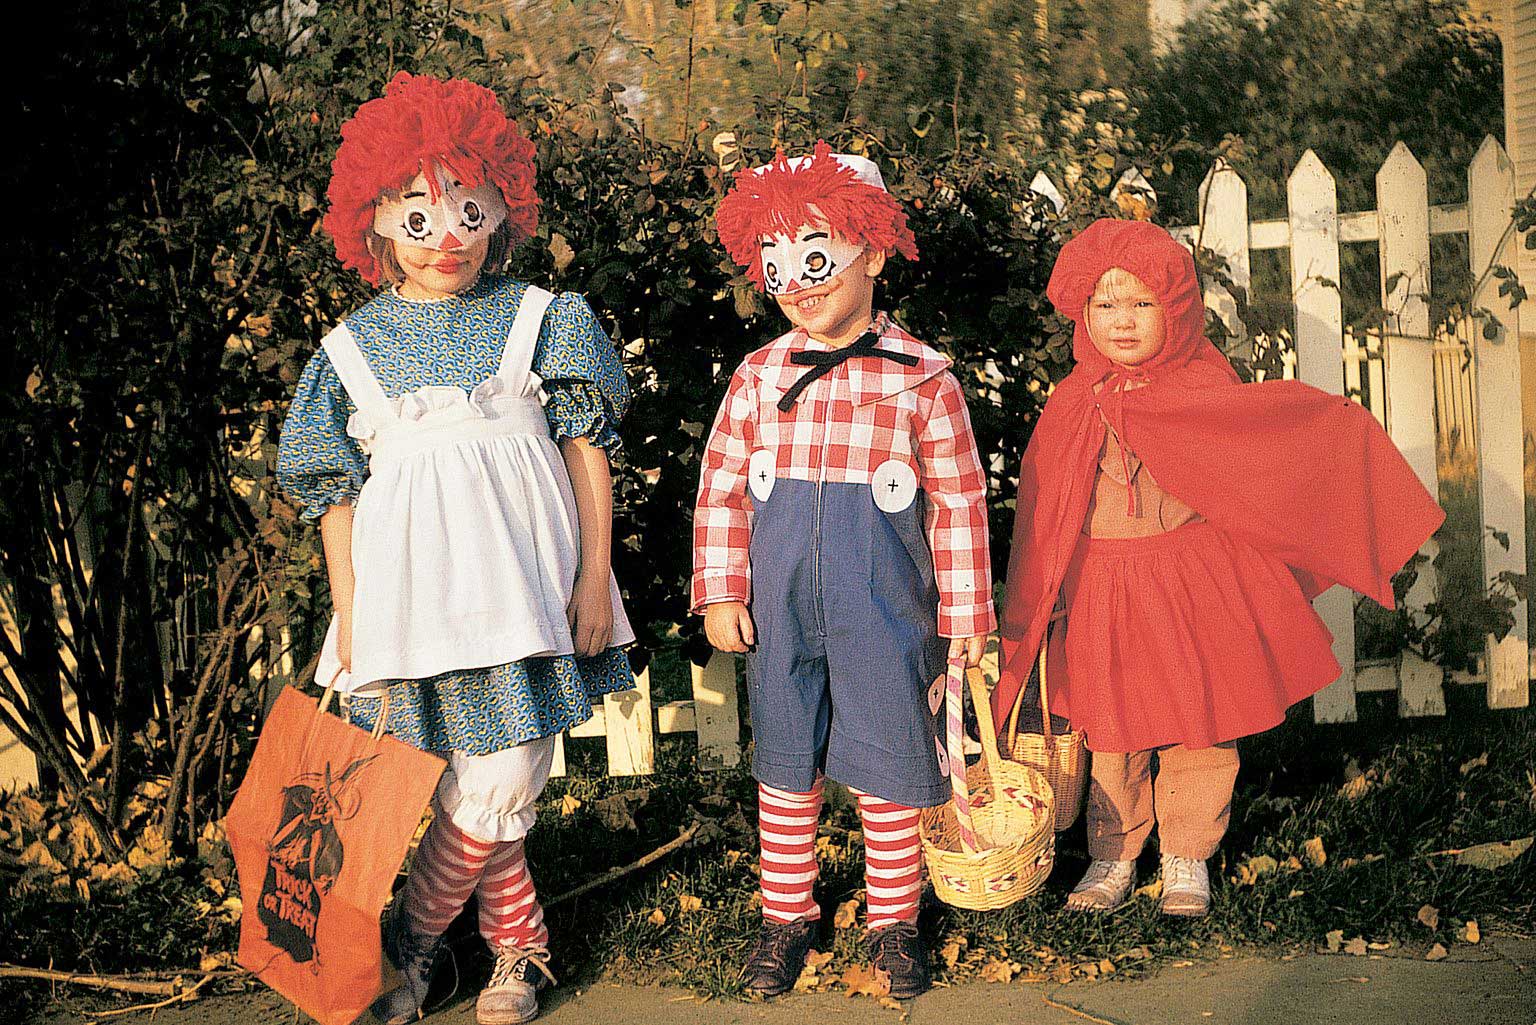 Trick or Treat! Halloween costumes have a colorful, creative history